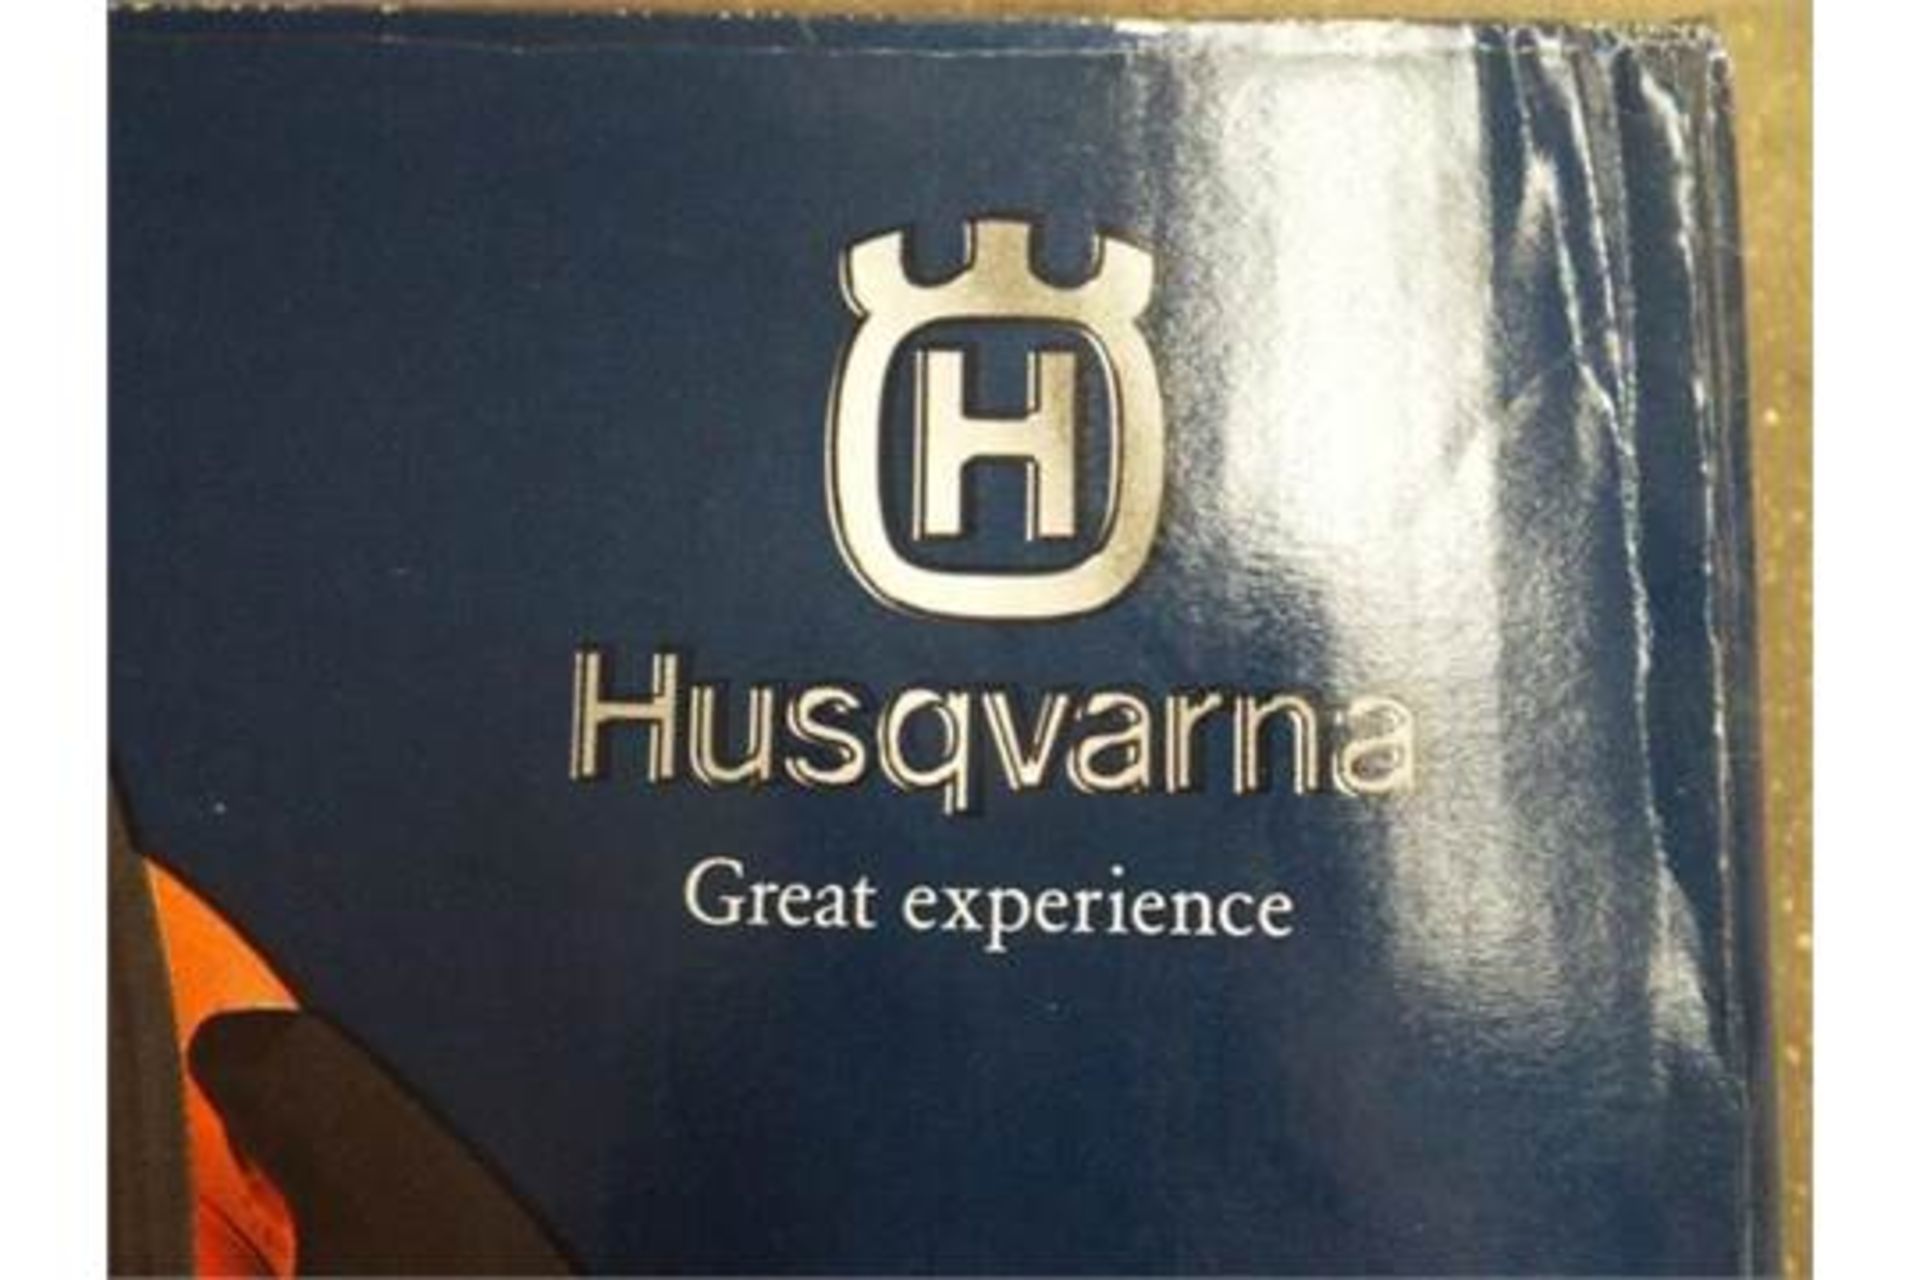 New Unused Husqvarna 240 E-Series Chainsaw with 16" Blade - Image 4 of 6